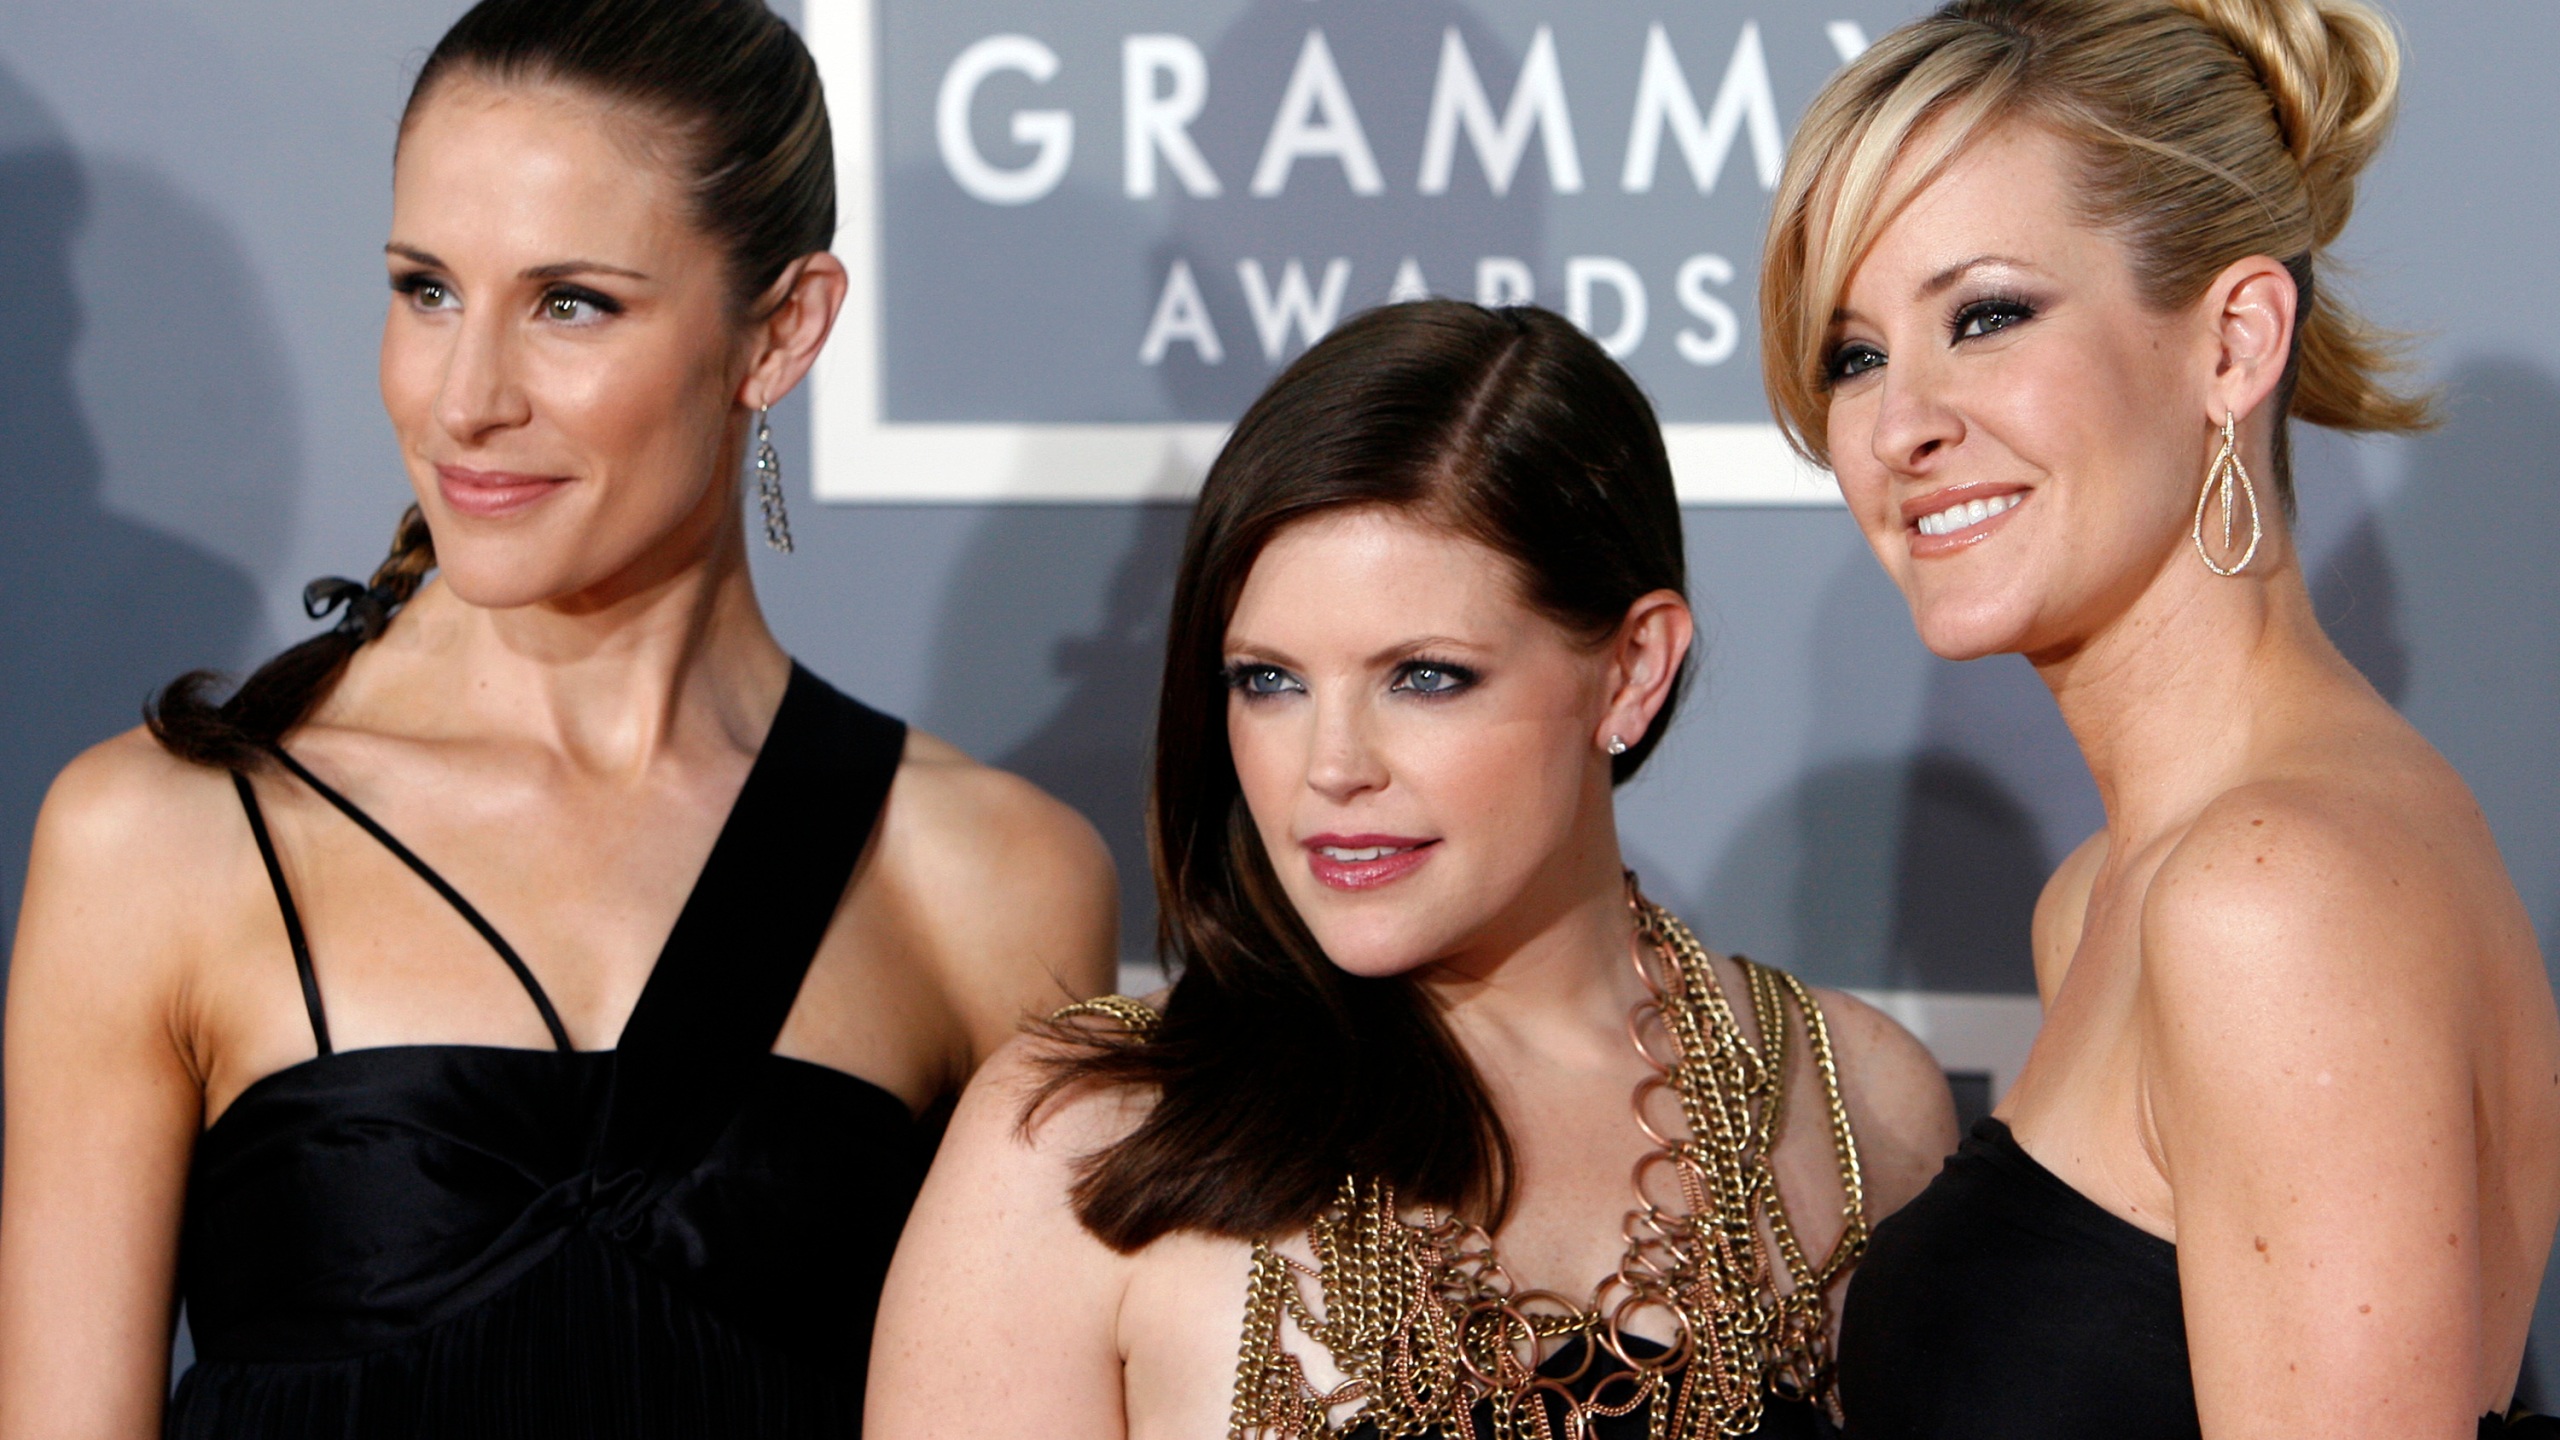 The Dixie Chicks officially change their name to The Chicks